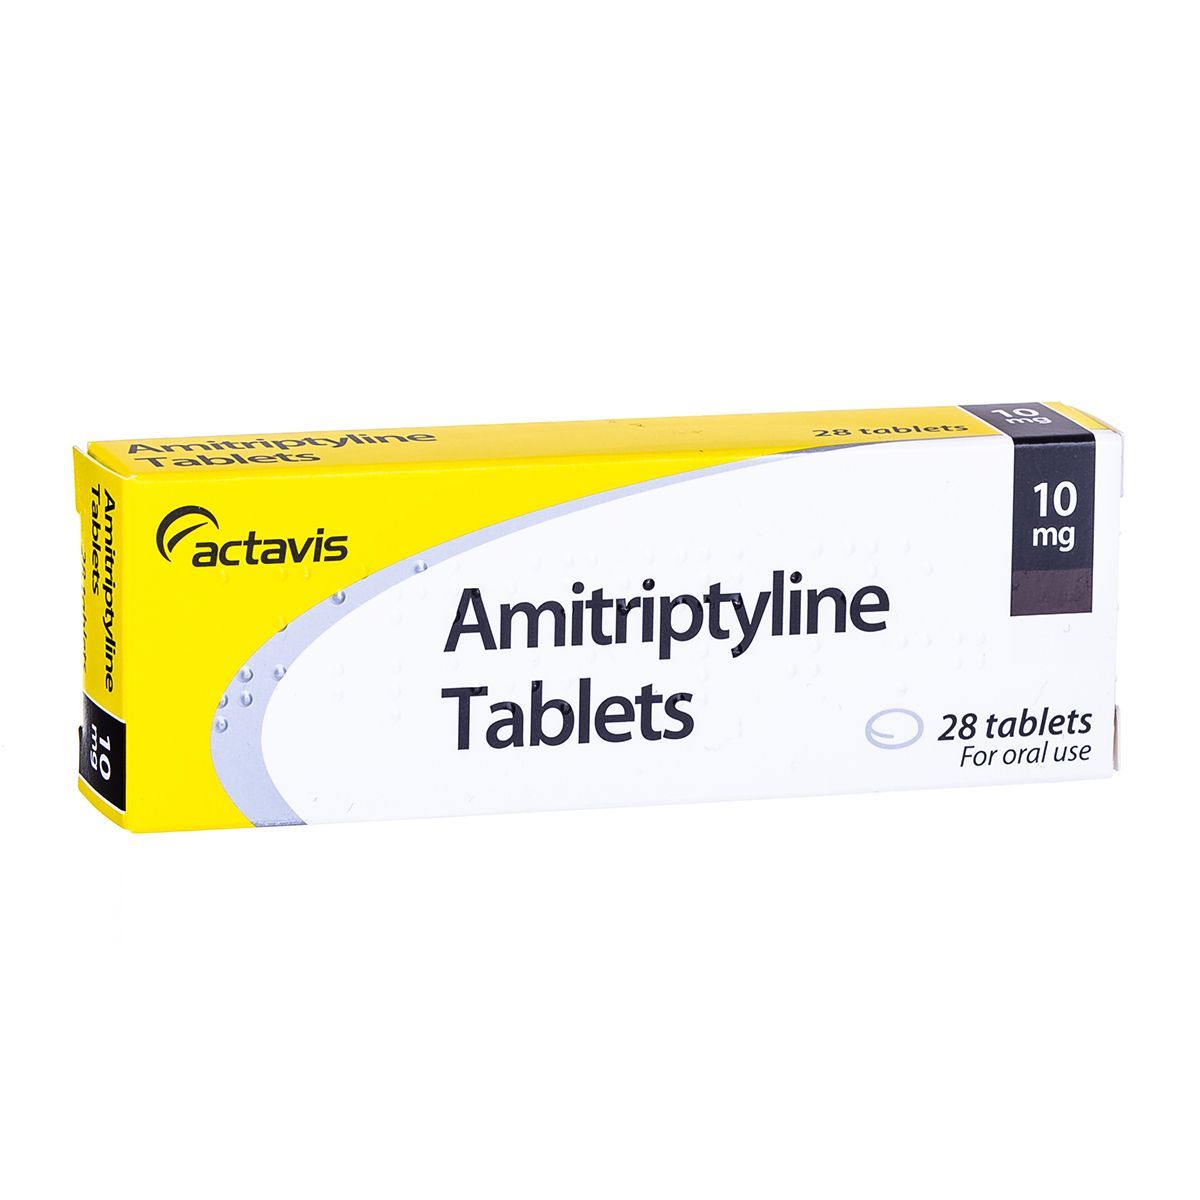 Buying Amitriptyline Made Easy By Online Medicine Vendors